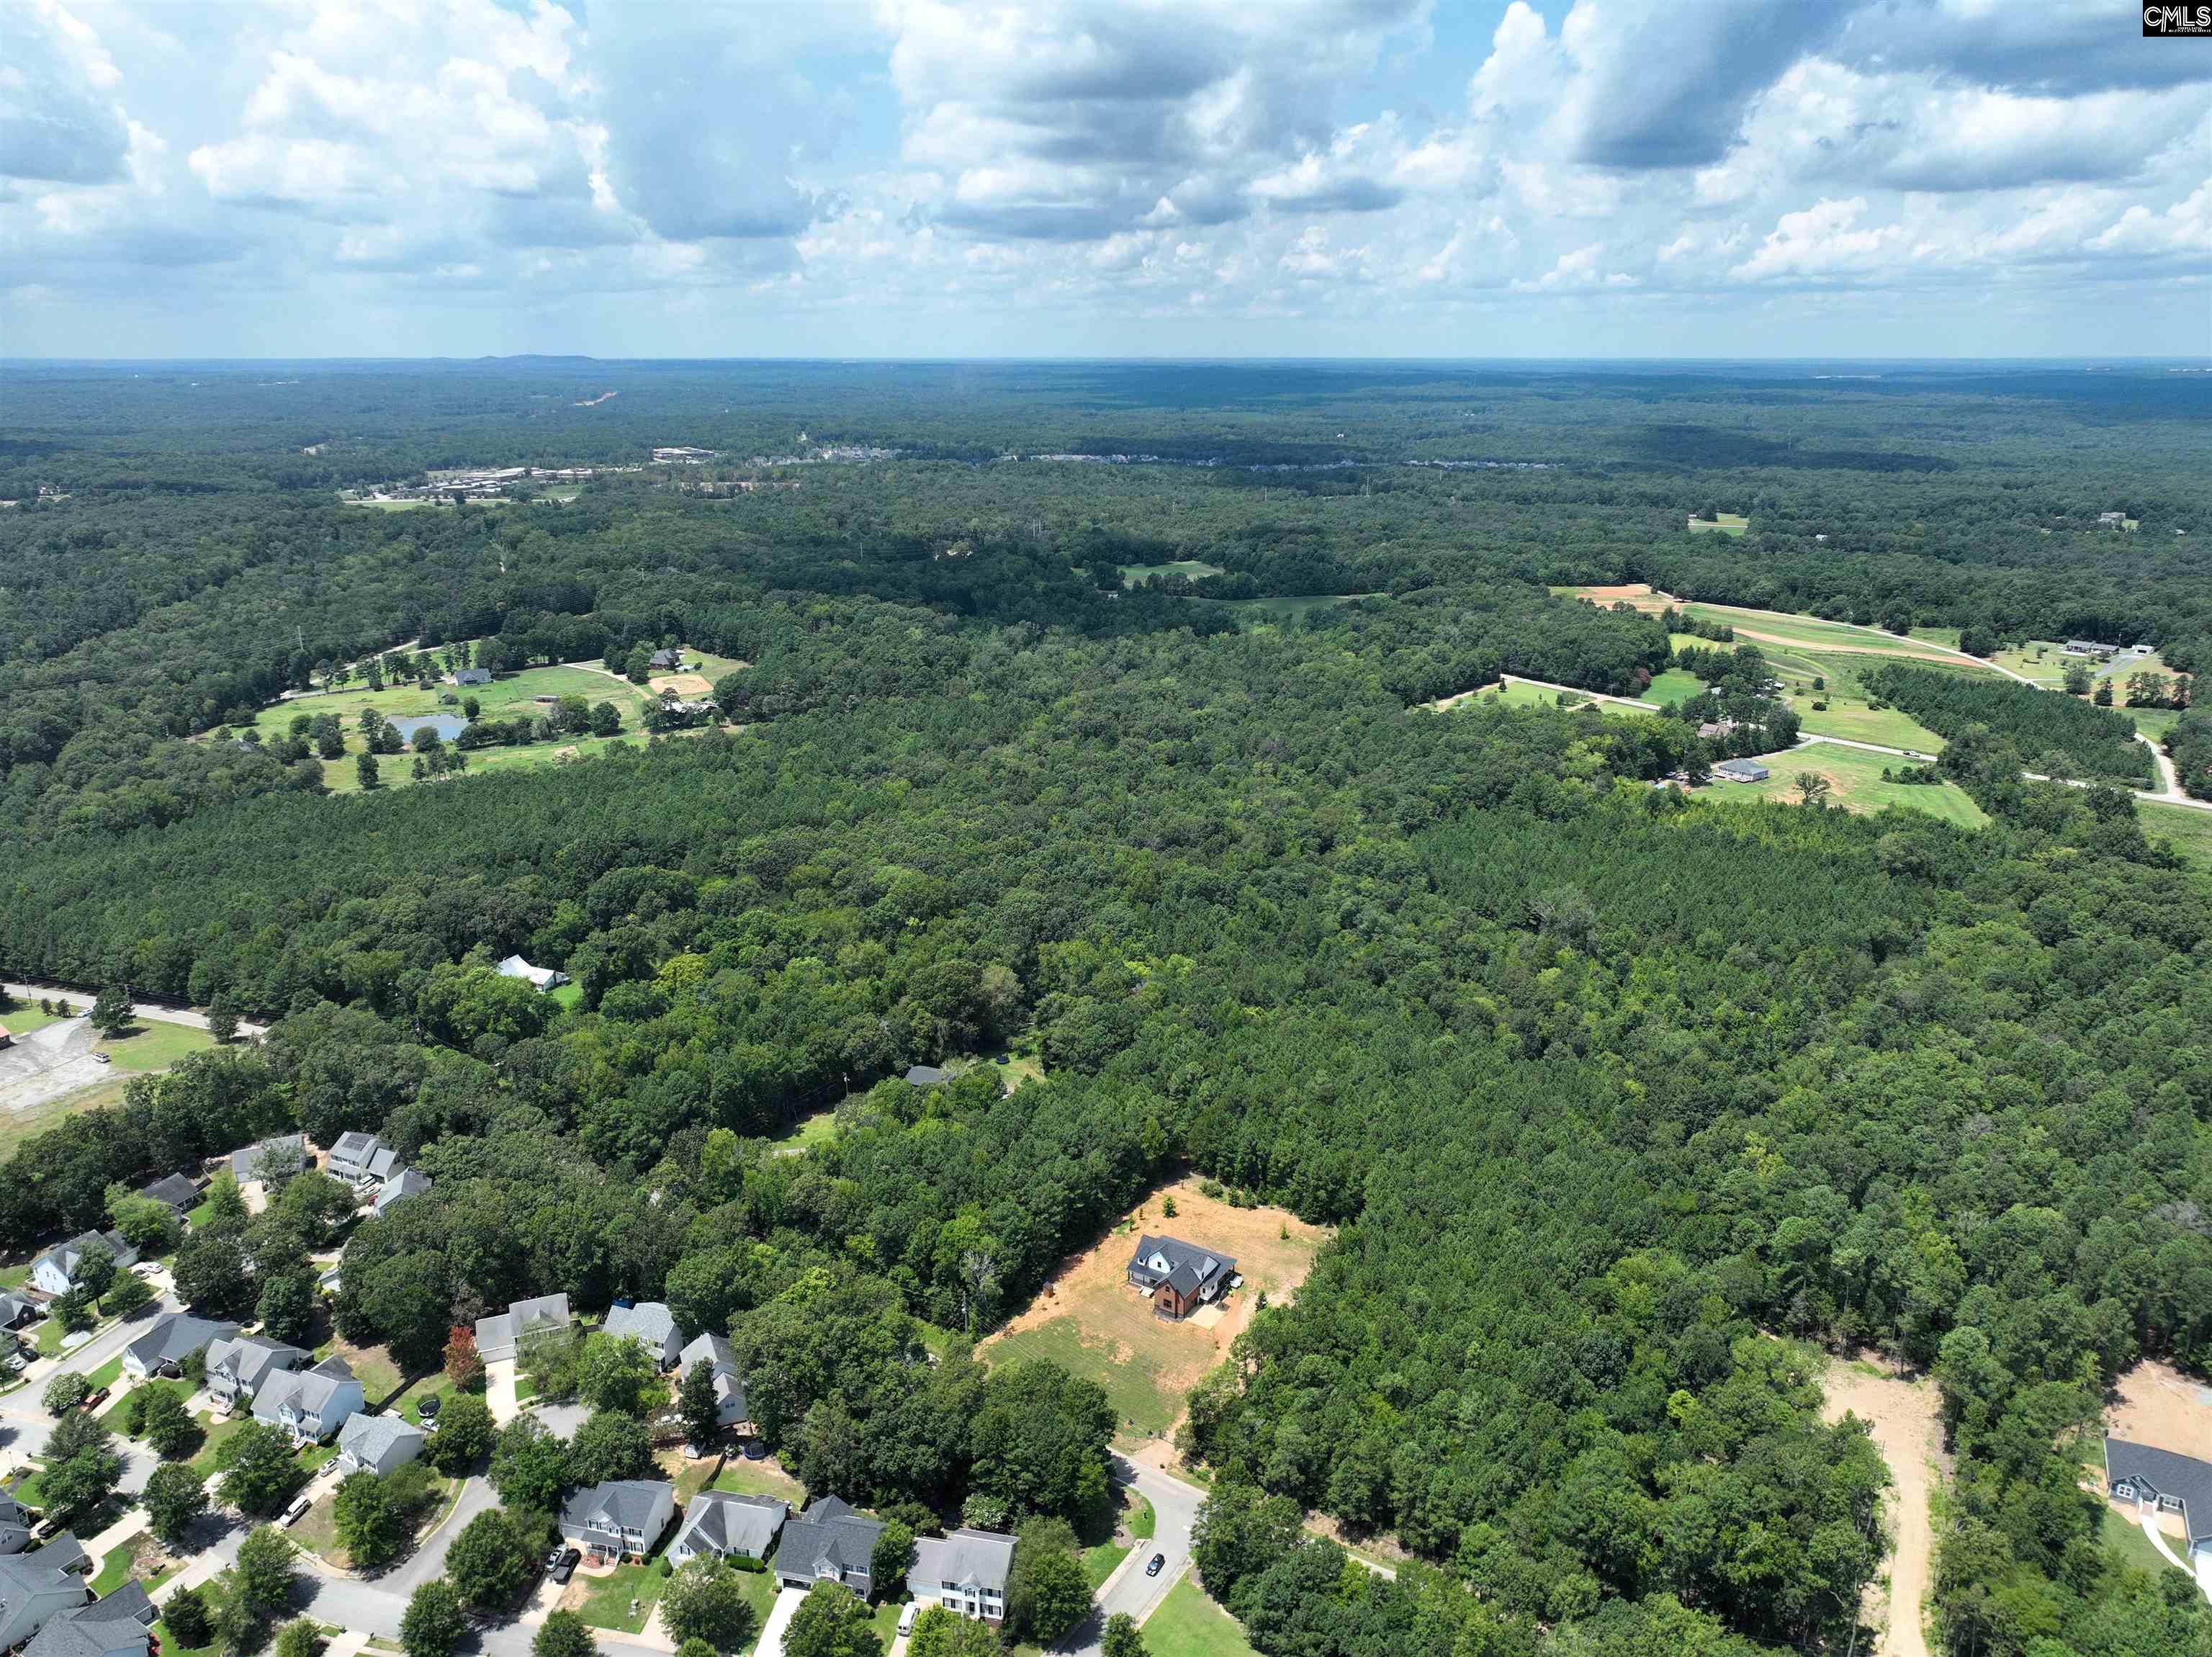  Lots For Sale -  Hopewell Church, Irmo, SC - 0 